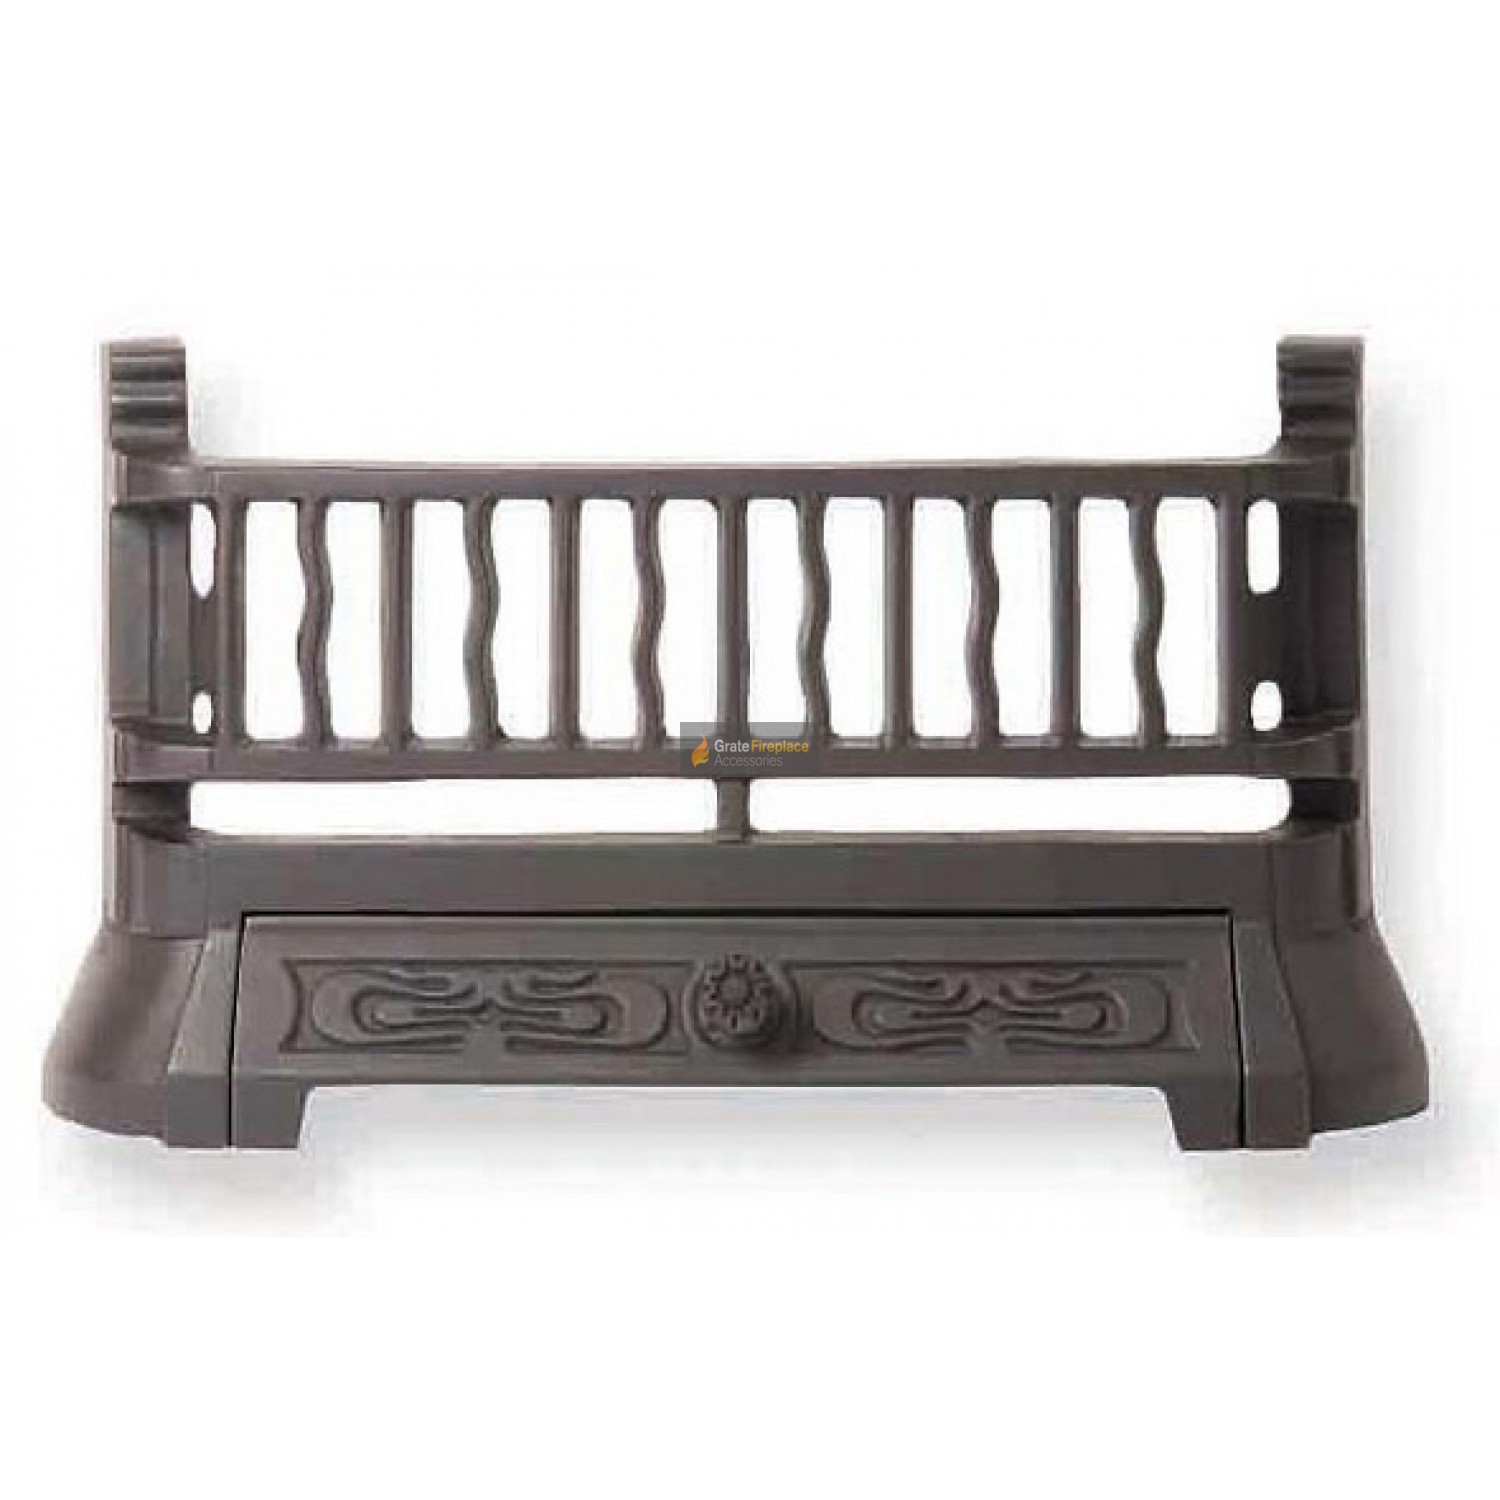 Wrought Iron Fireplace Grate Luxury Antique Fireplaces Mantels & Fireplace Accessories Cast